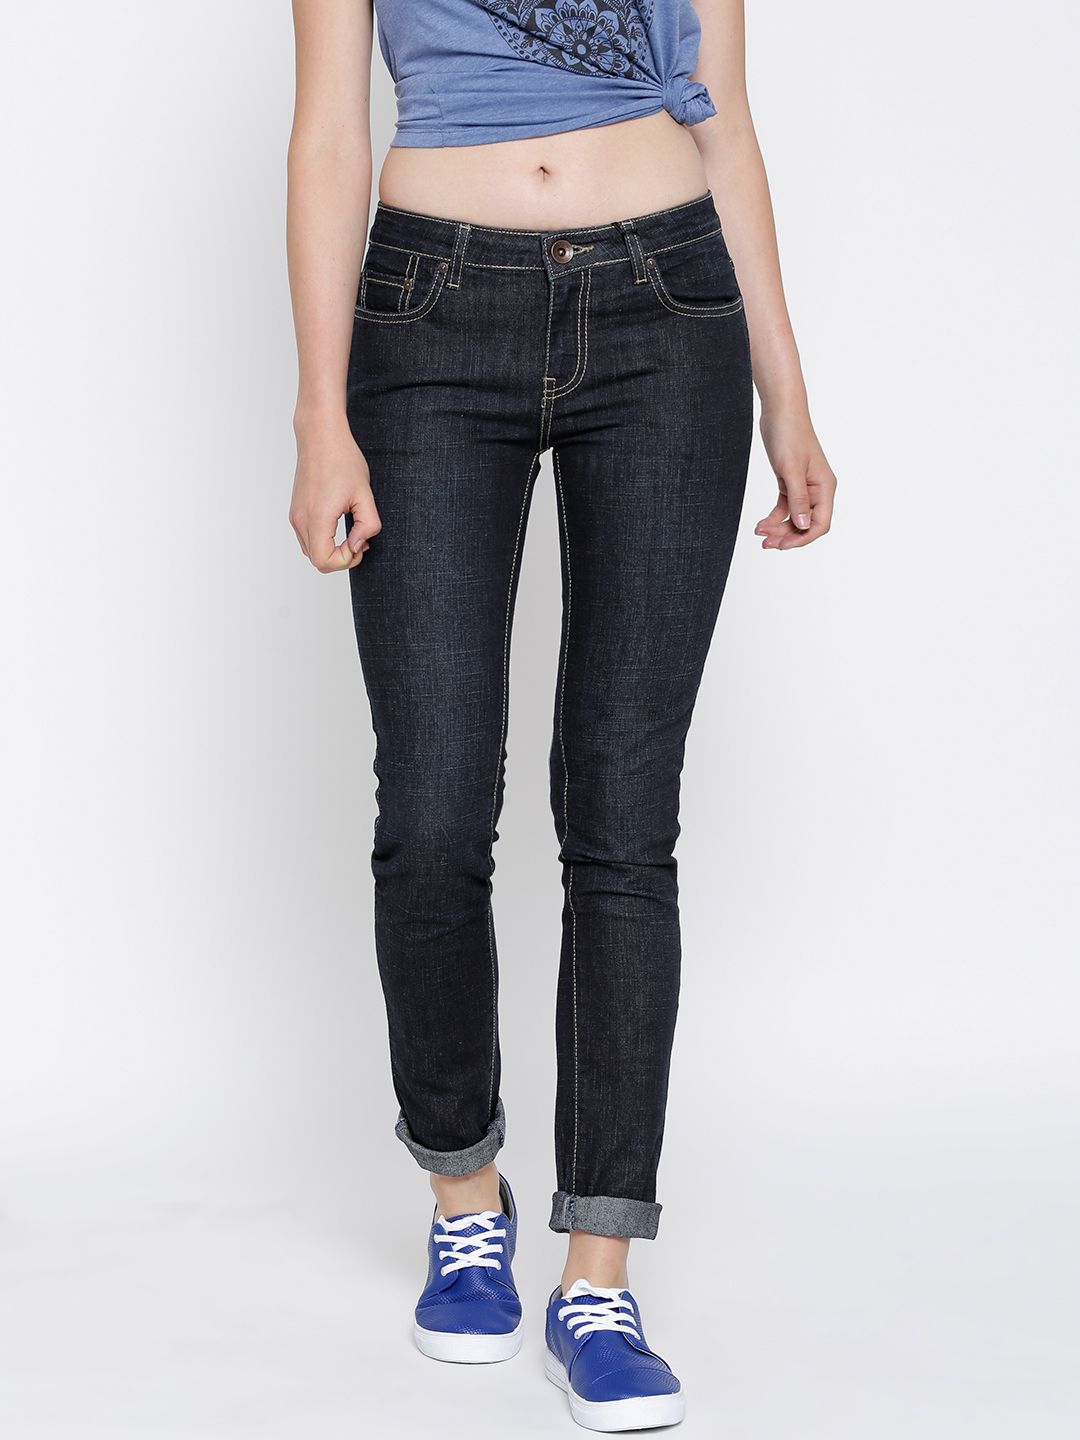 Pepe Jeans Navy Frisky Fit Jeans Price in India